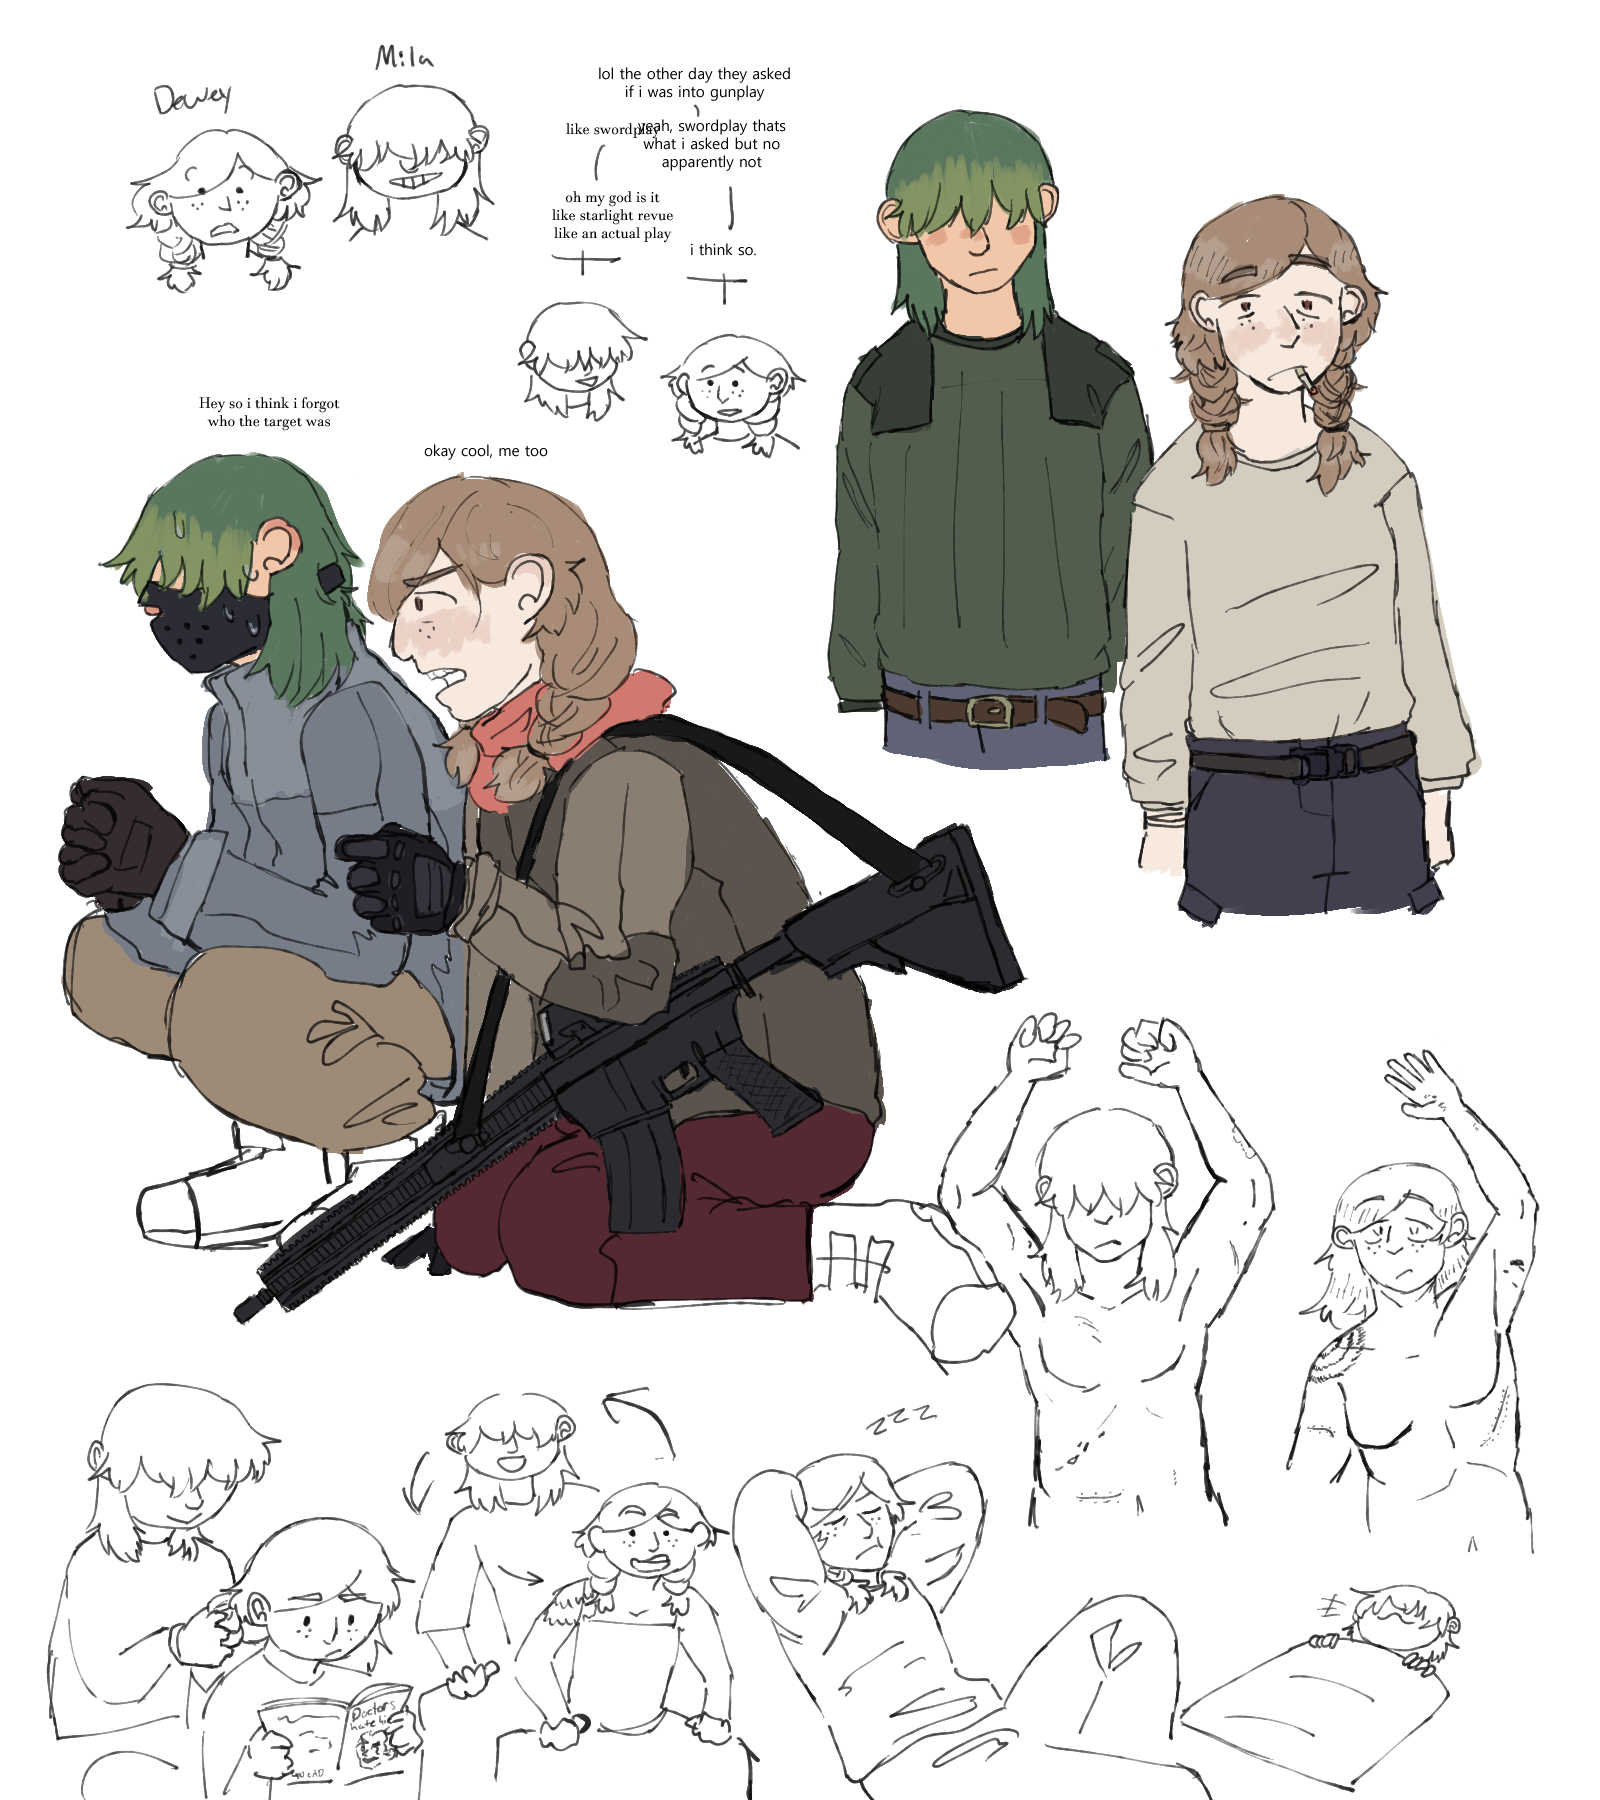 digital art of two characters. it a collection of drawings of them. the first is a green haired, slightly taller woman named Mila. She tends to wear a thick military-style sweater. You can't see her eyes from behind her lime tinged bangs. The other woman is named Dewey and has her brown hair in two sloppy braids. she wears a stretched out tan long-sleeve shirt. more description will be added later - i draw in large doodle batches.